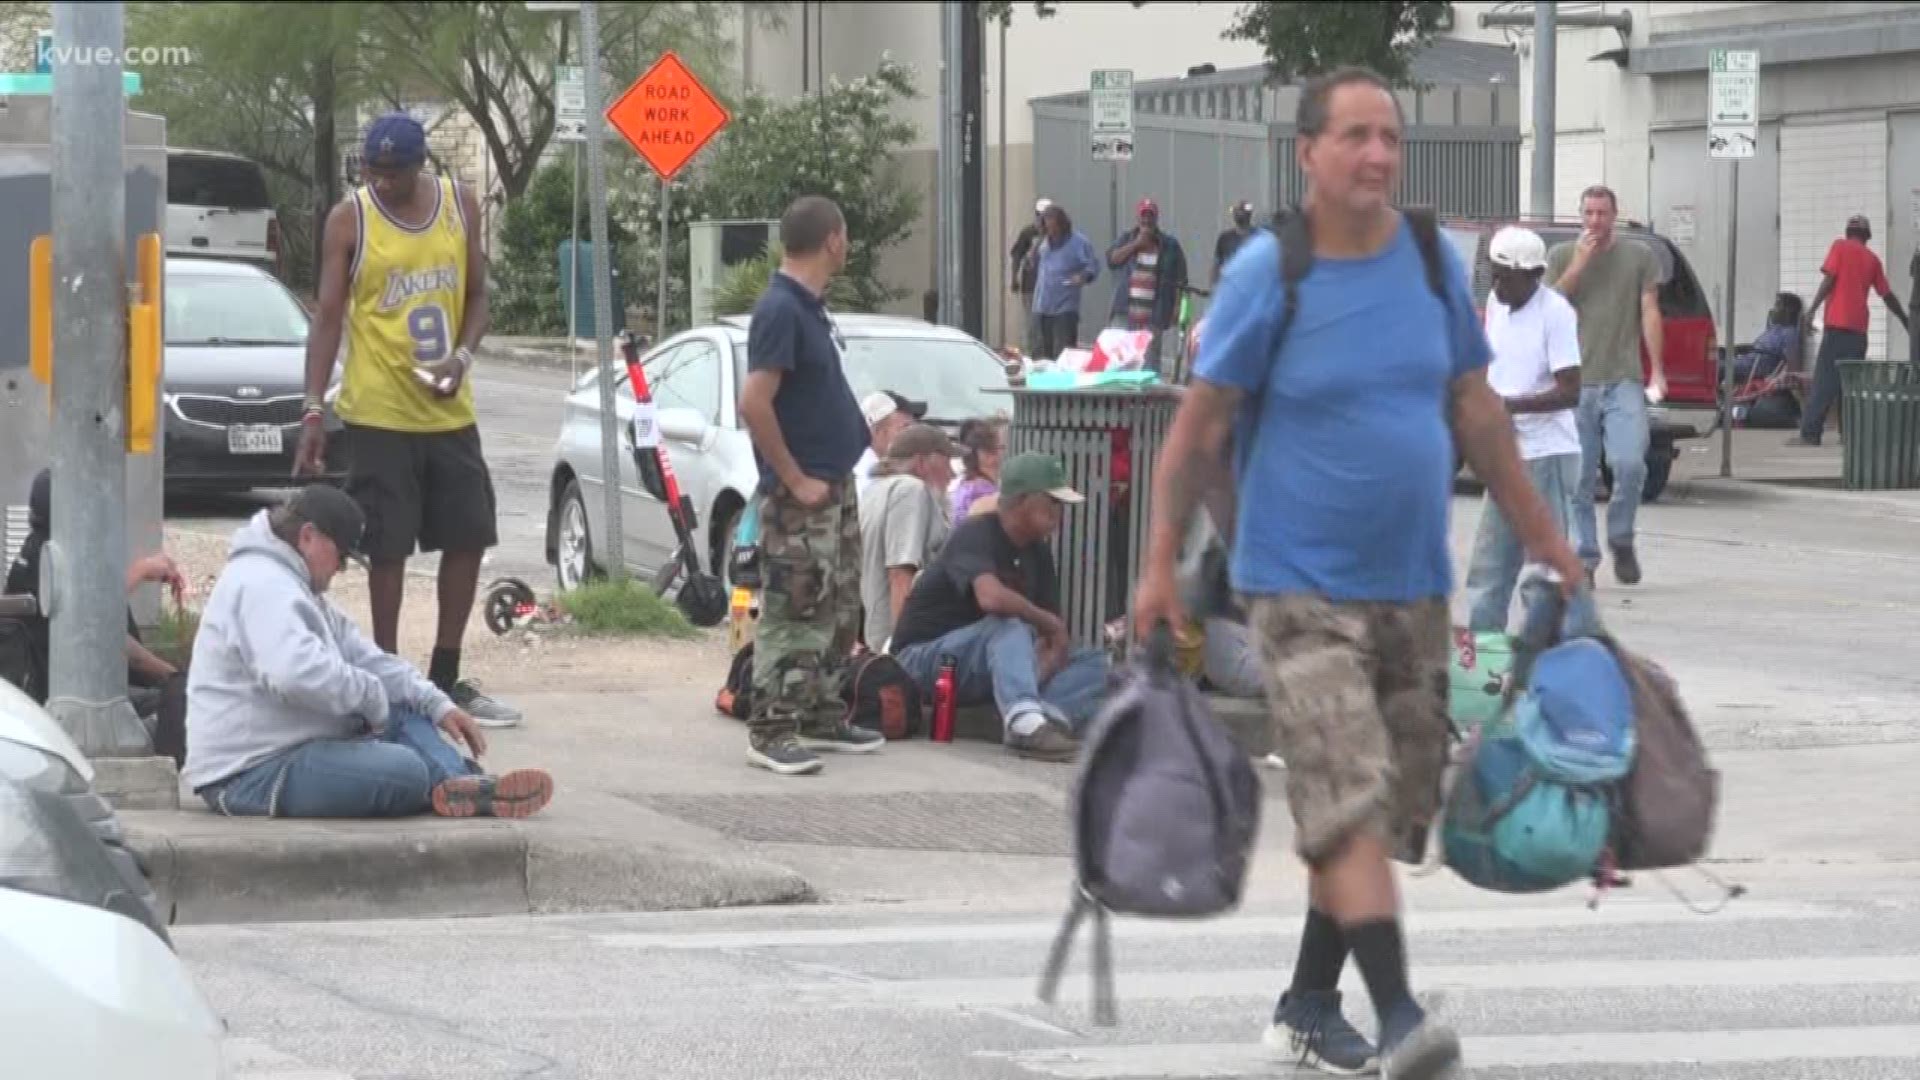 Austin Mayor Steve Adler said the recent changes to the city's homeless ordinances are meant to help fight the issues, not amplify them.